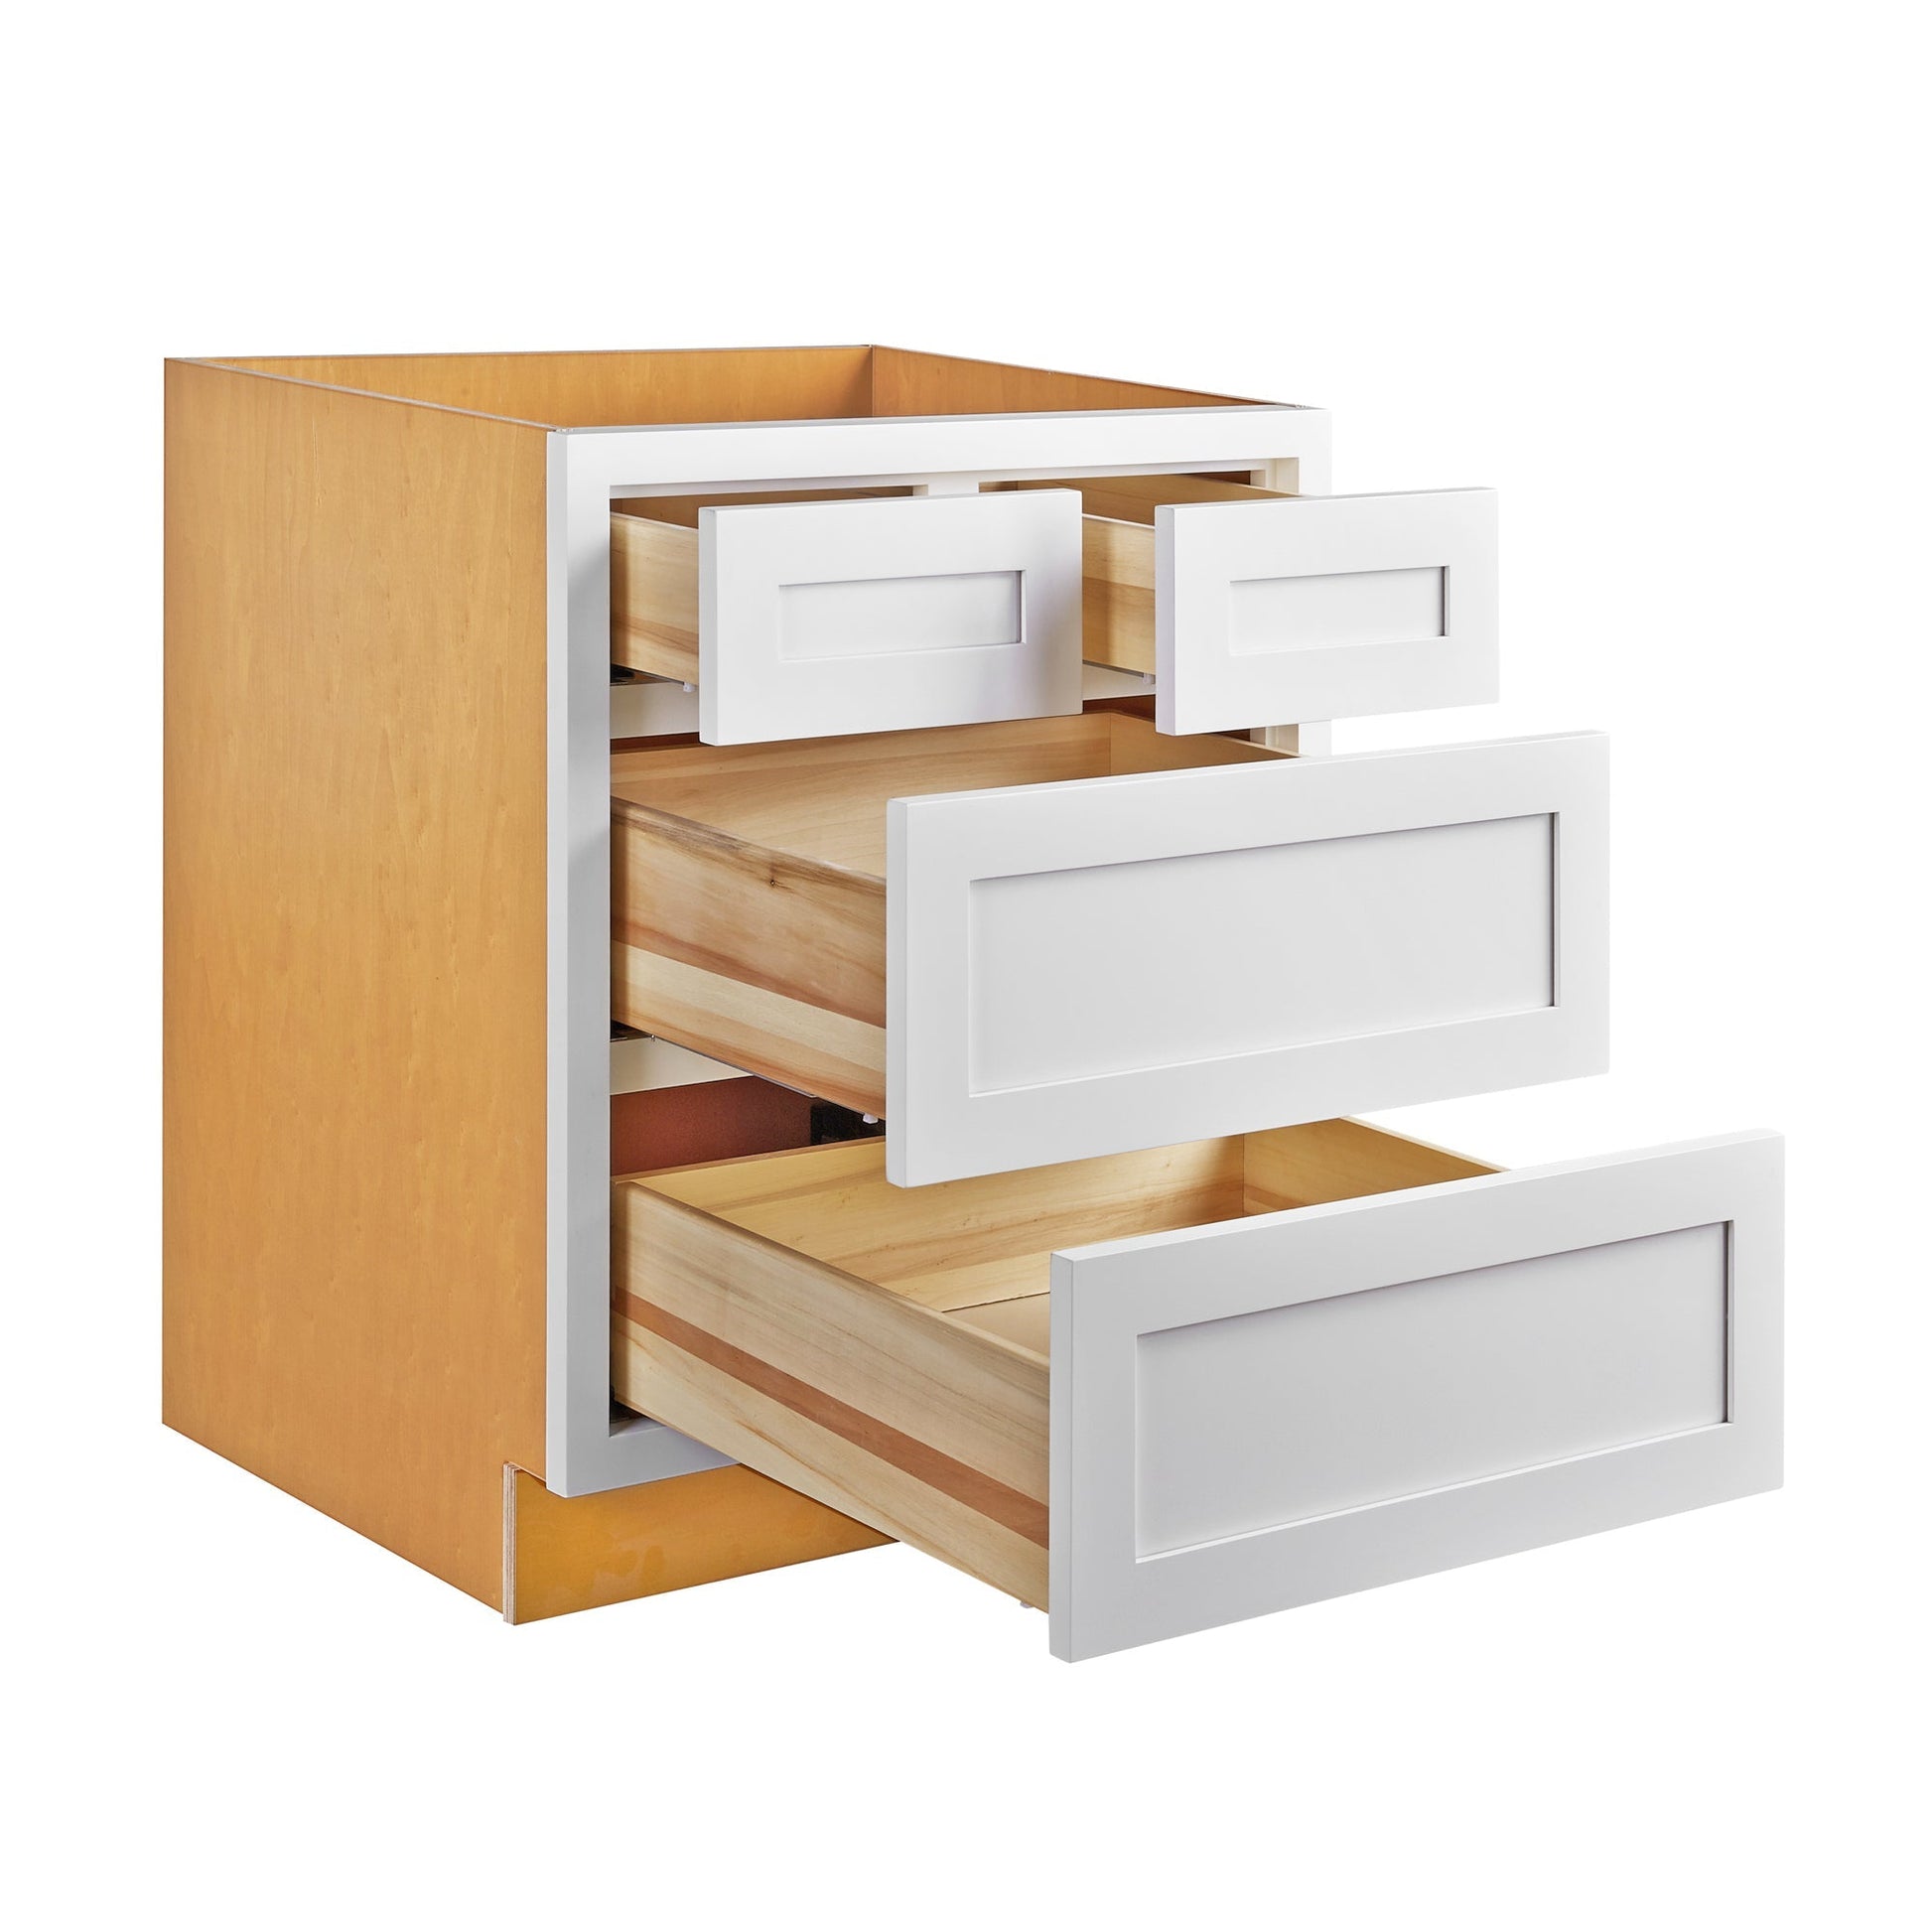 https://kitchenoasis.com/cdn/shop/files/Maplevilles-Cabinetry-30-Snow-White-Inset-Modern-Shaker-Style-RTA-Birch-Wood-Storage-Base-Kitchen-Cabinet-With-4-Drawers-2.jpg?v=1685856165&width=1946